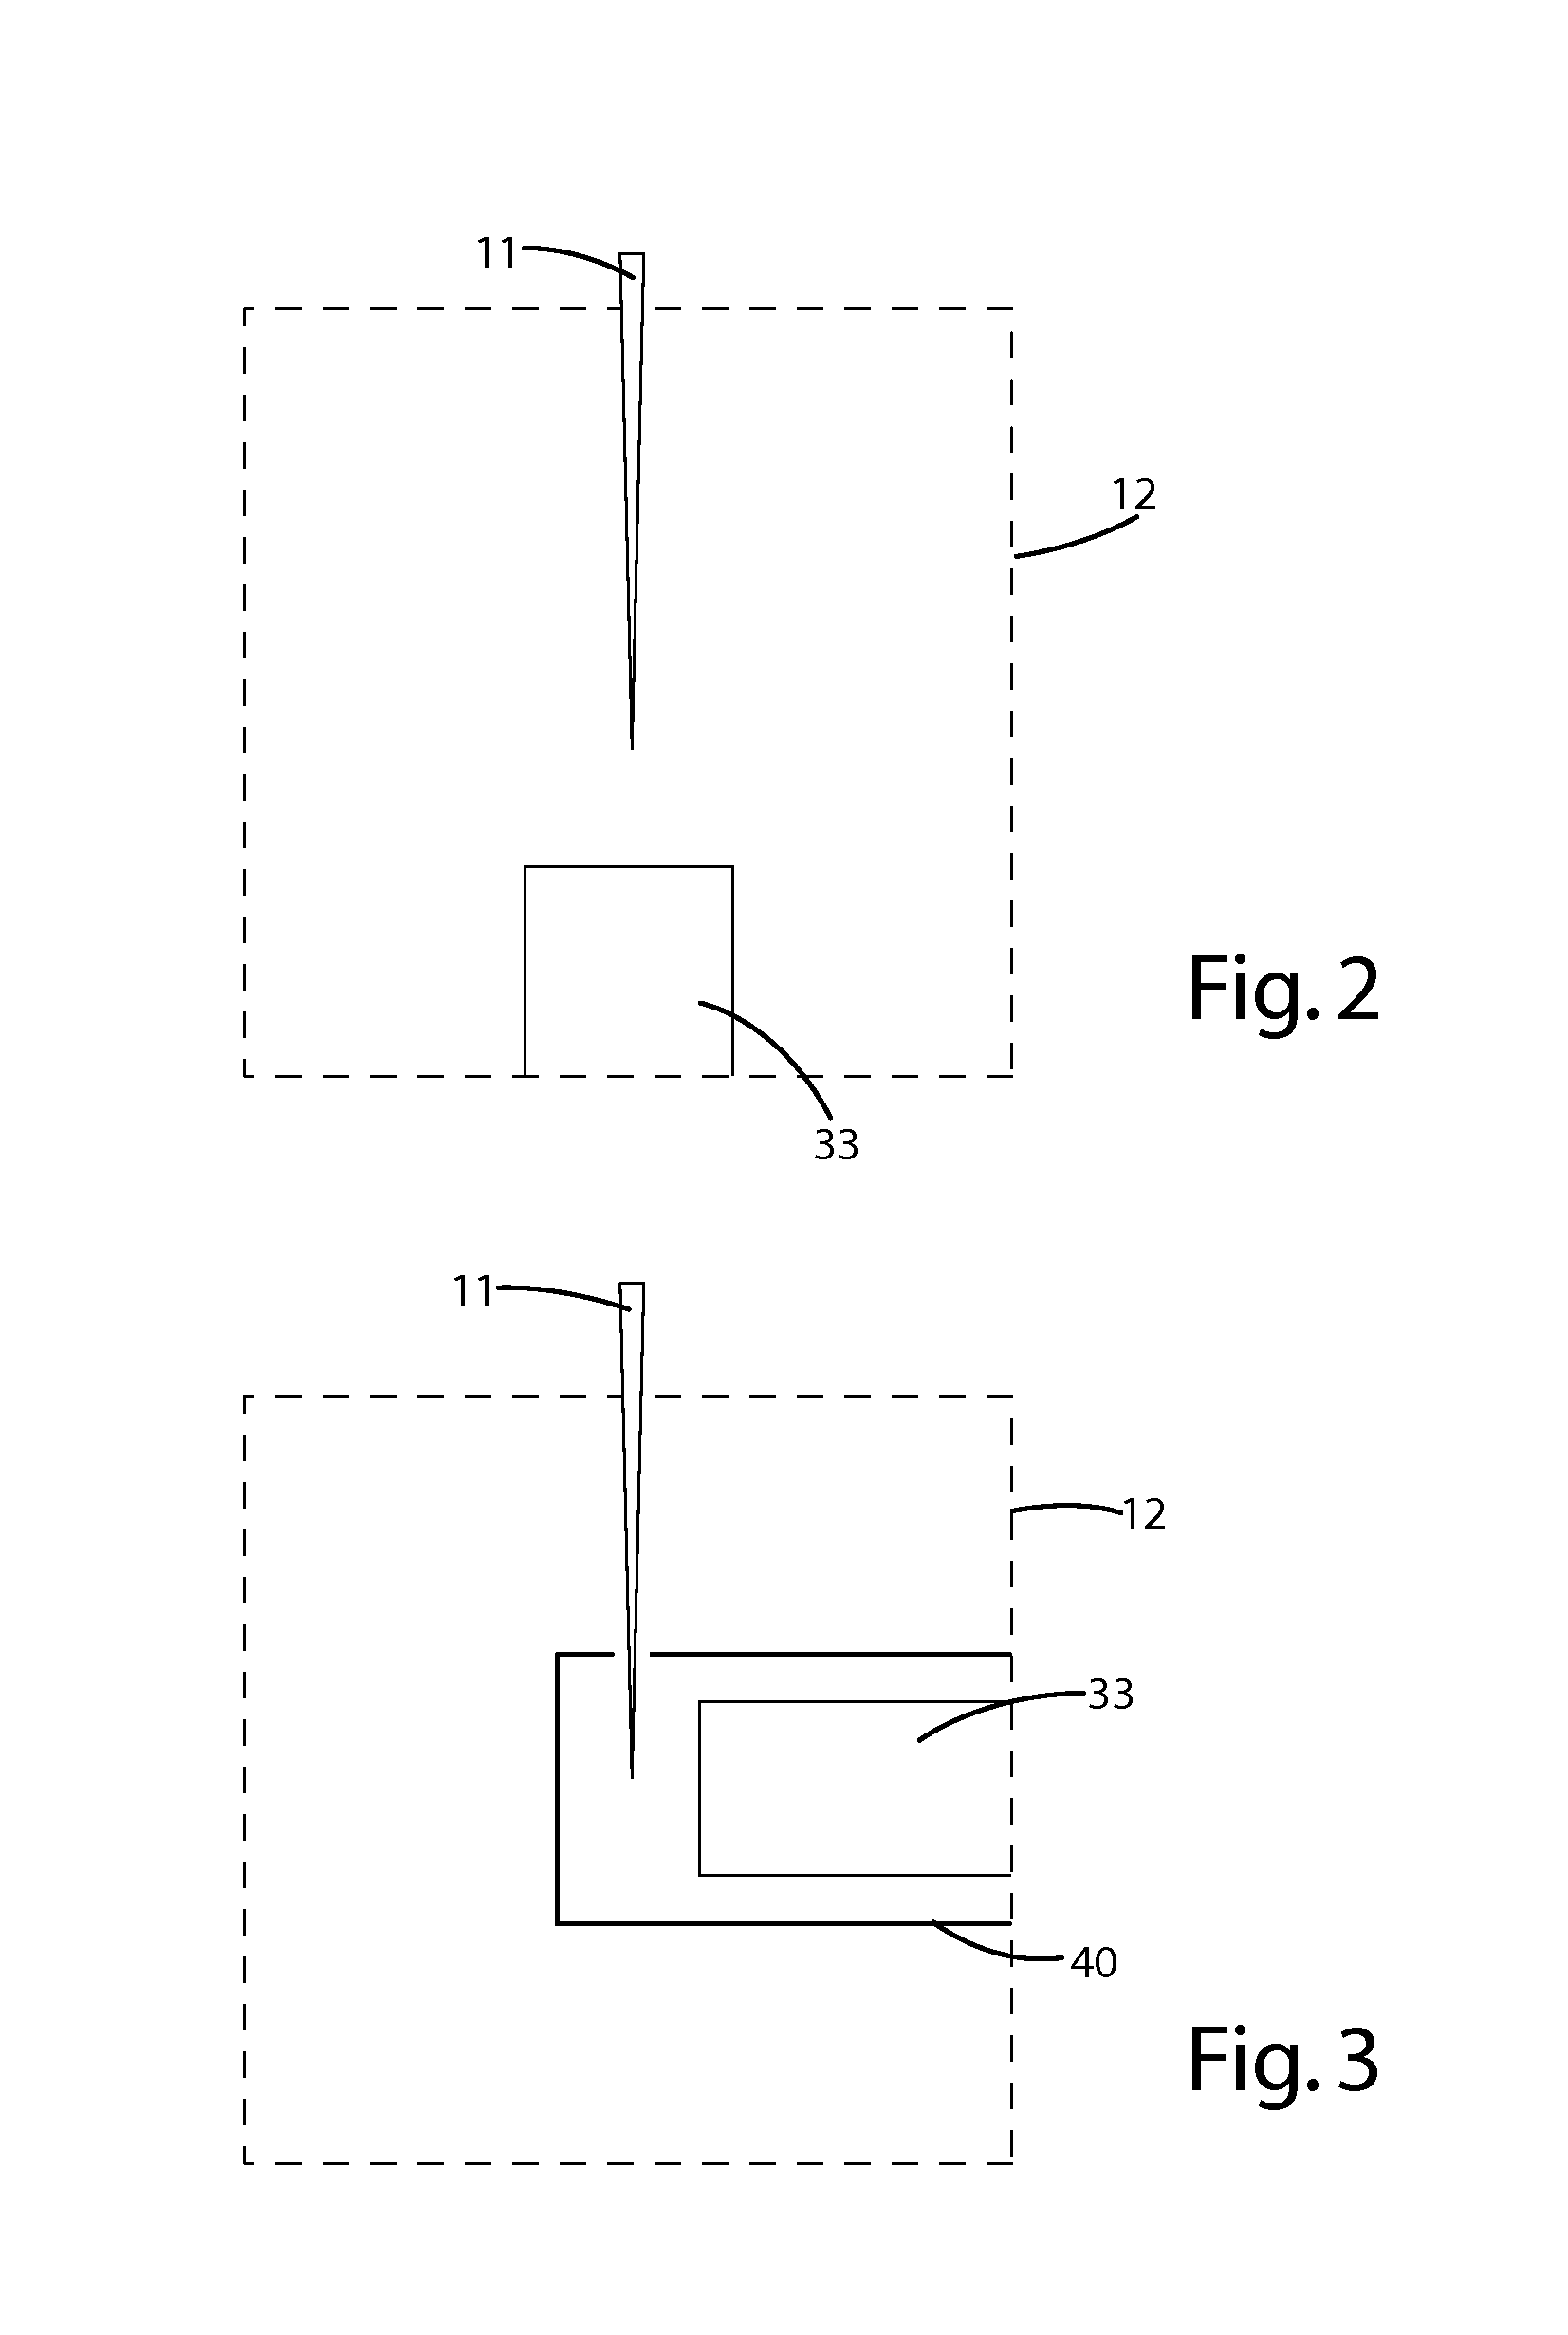 Repetitive pressure-pulse apparatus and method for cavitation damage research